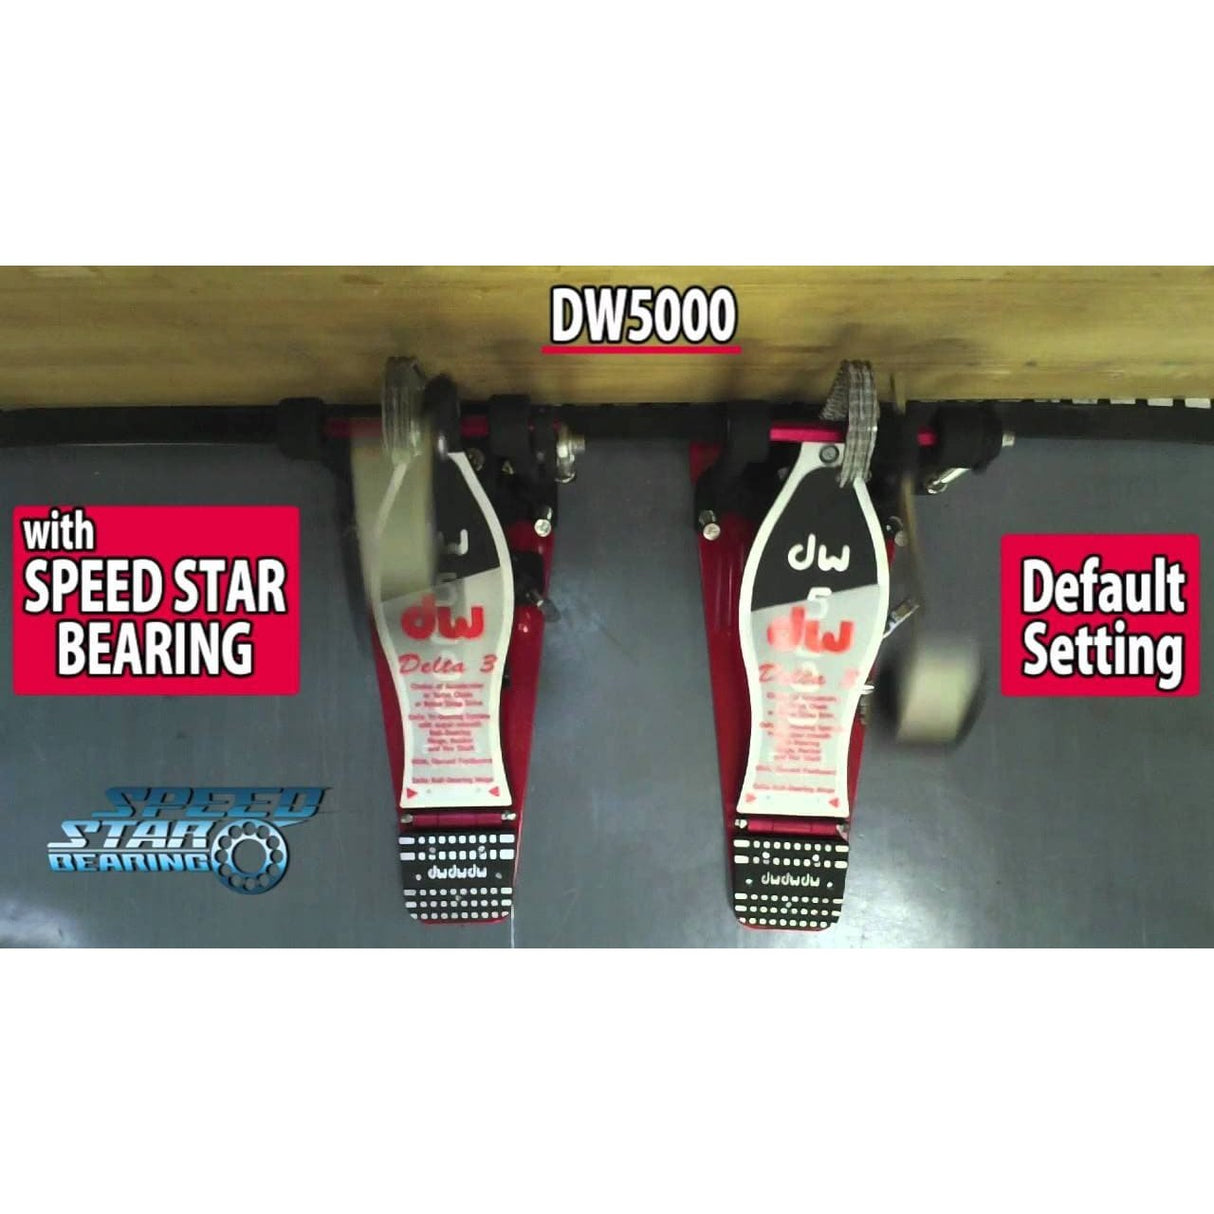 Canopus Speed Star Bearing for DW 5000 Pedals